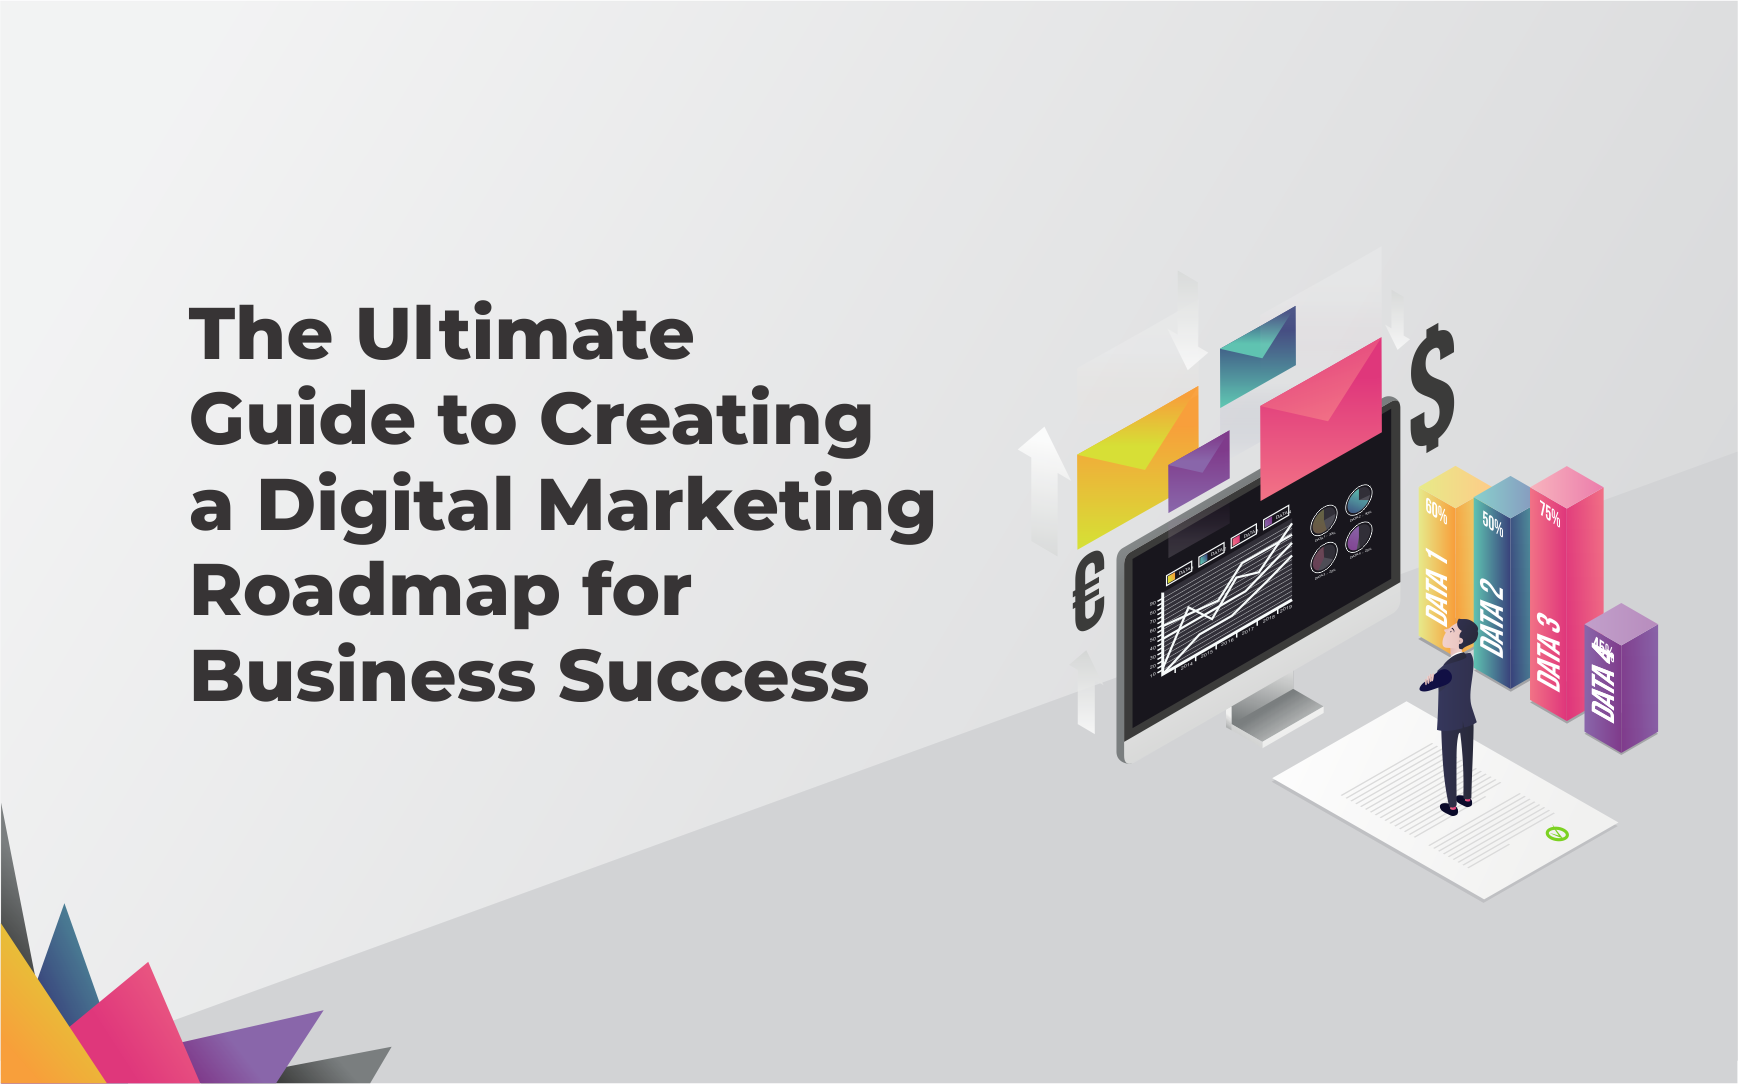 The Ultimate Guide to Creating a Digital Marketing Roadmap for Business Success